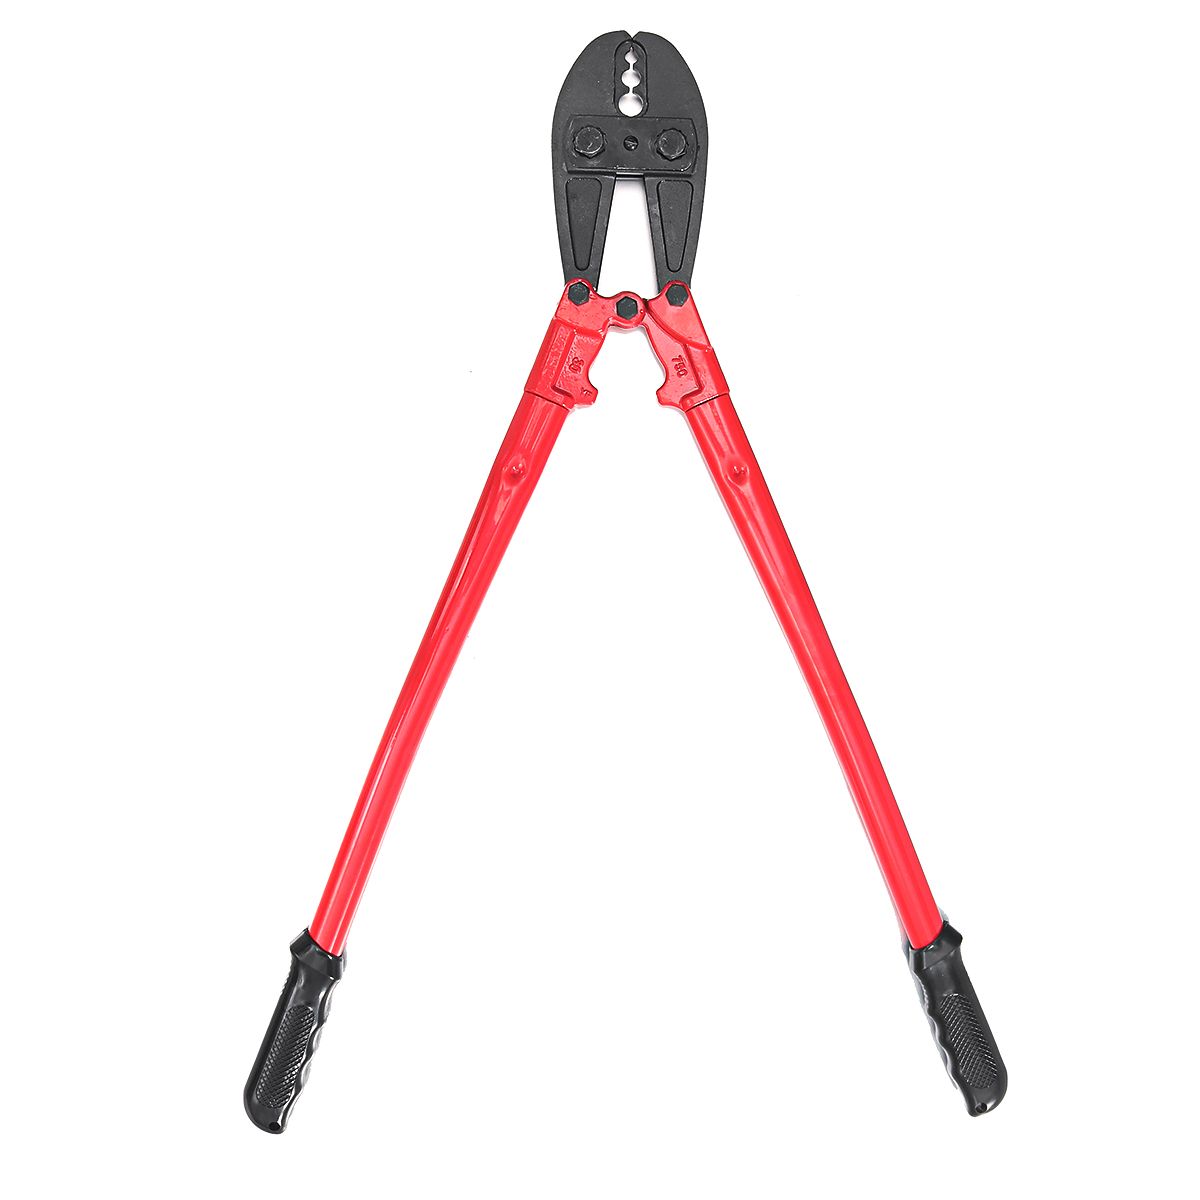 30quot-Hand-Swager-Swaging-Crimping-Tool-Pliers-for-468mm-1606072